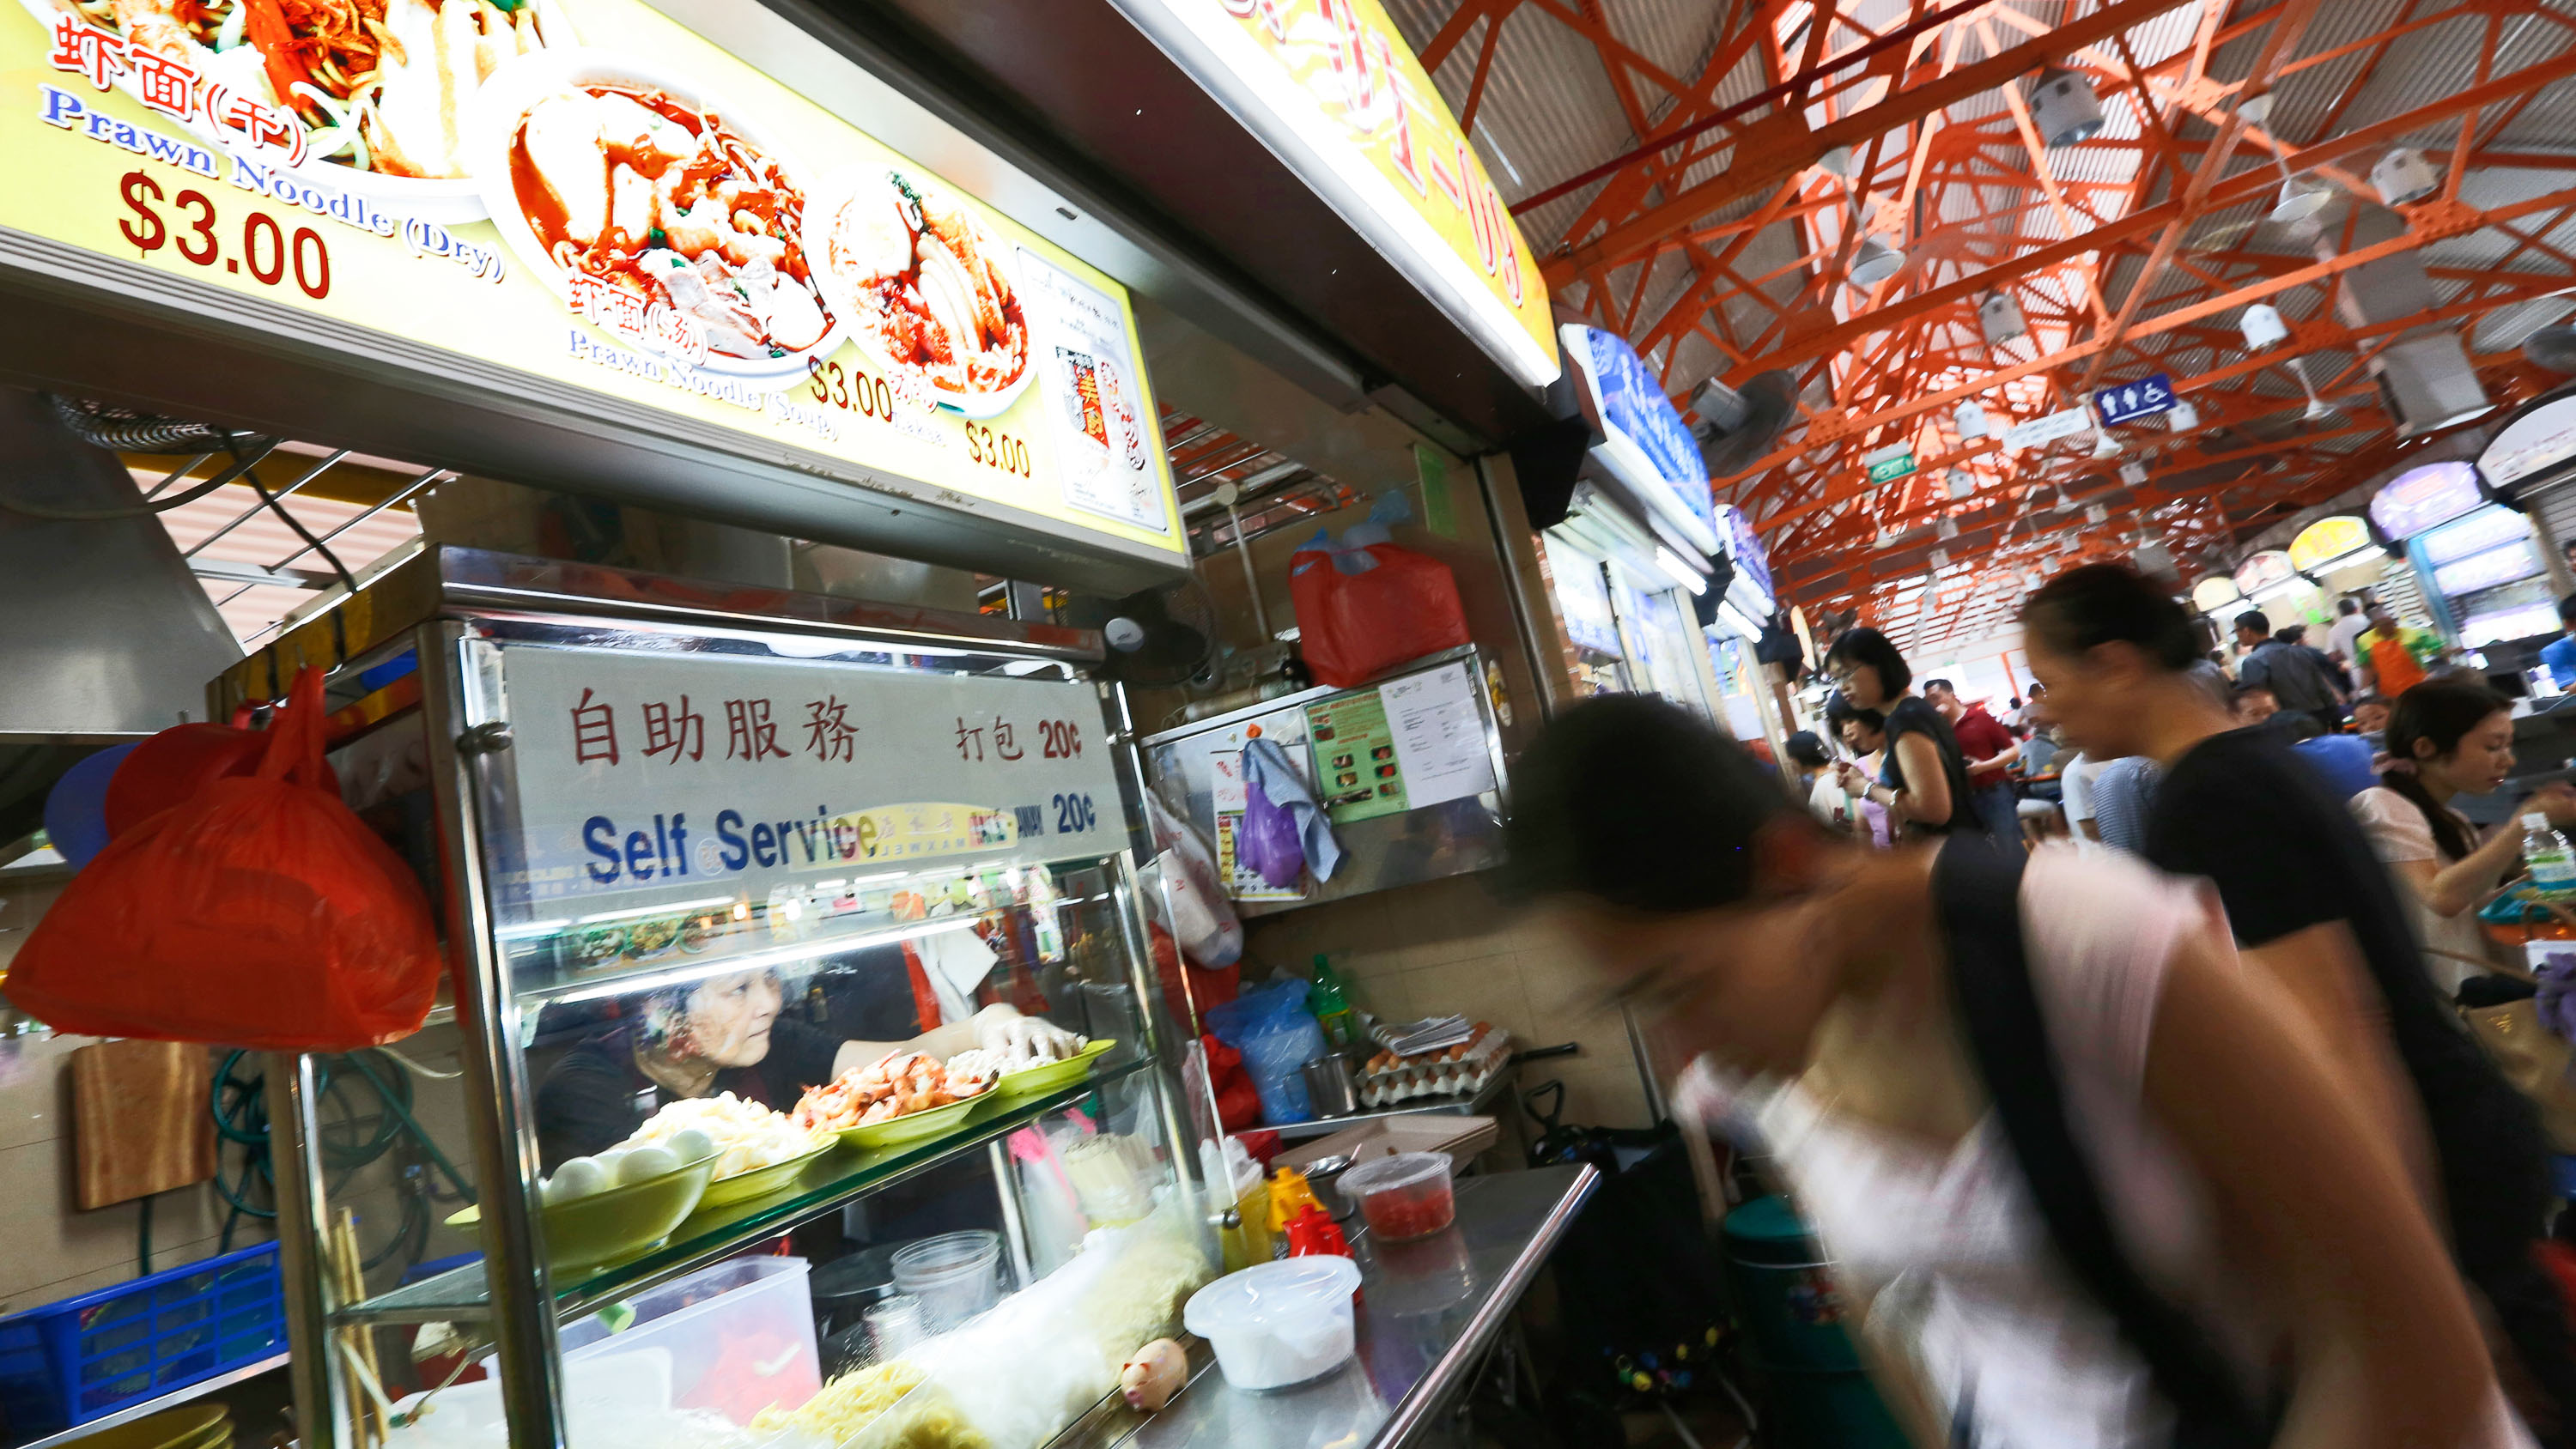 SINGAPOREAN HAWKERS. A noodle stall owner looks out from her food stall as customers walk past in a hawker or food centre in Singapore in 2013. For the first time, Michelin awarded stars to two street food hawkers in Singapore âÂ Hill Street Tai Hwa Pork Noodle and Hong Kong Soya Sauce Chicken Rice & Noodle. File photo by Hwee Young/EPA 